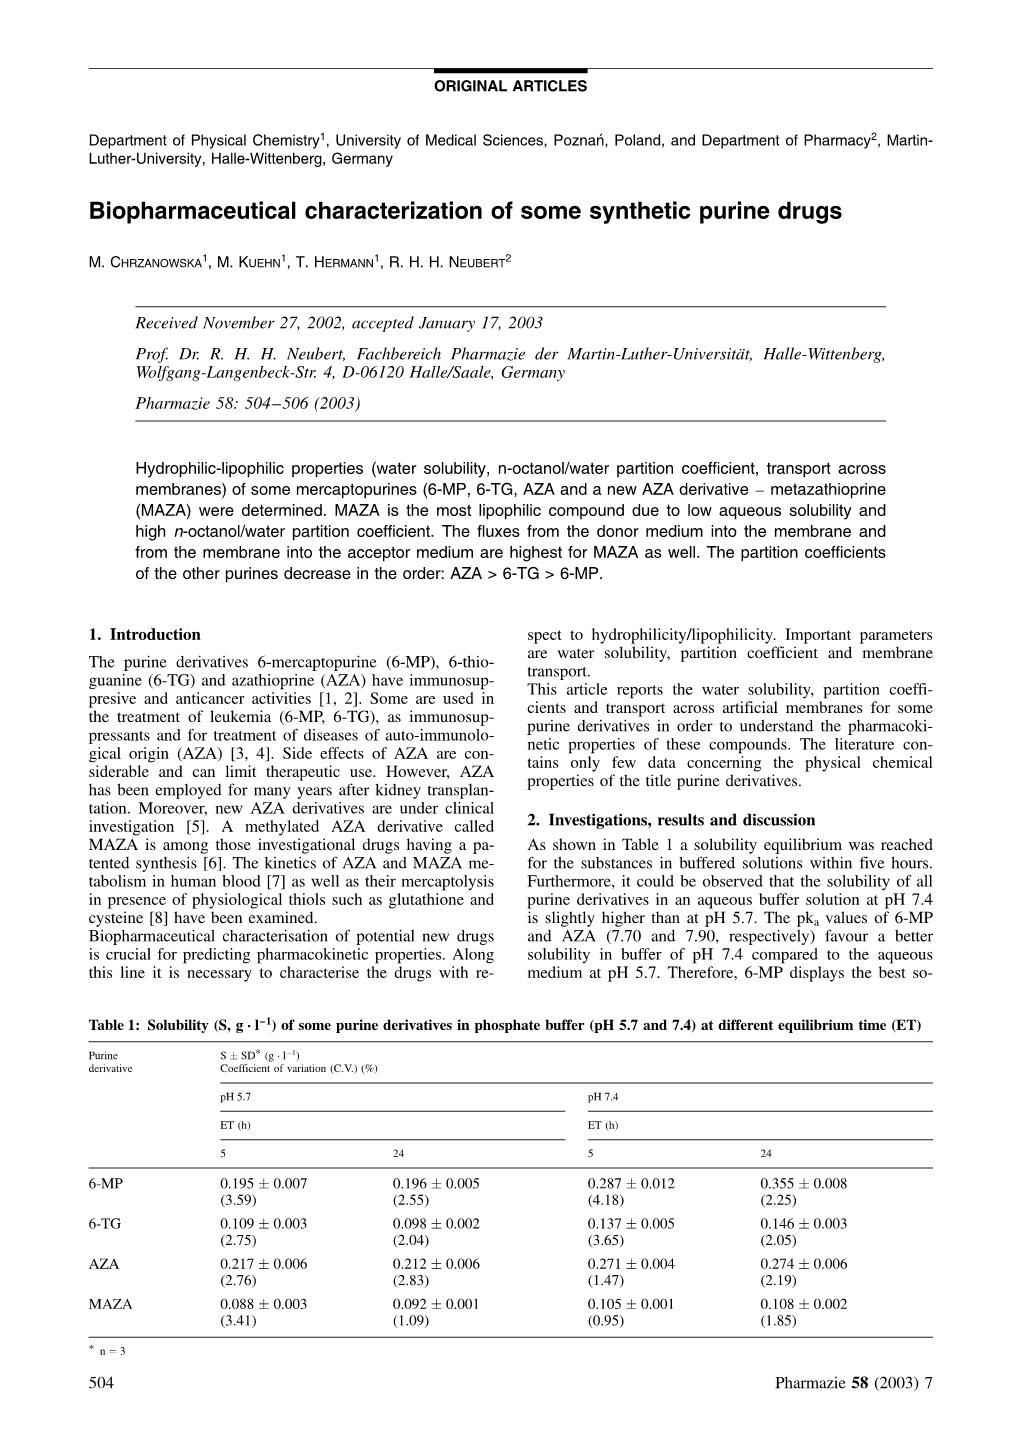 Biopharmaceutical Characterization of Some Synthetic Purine Drugs